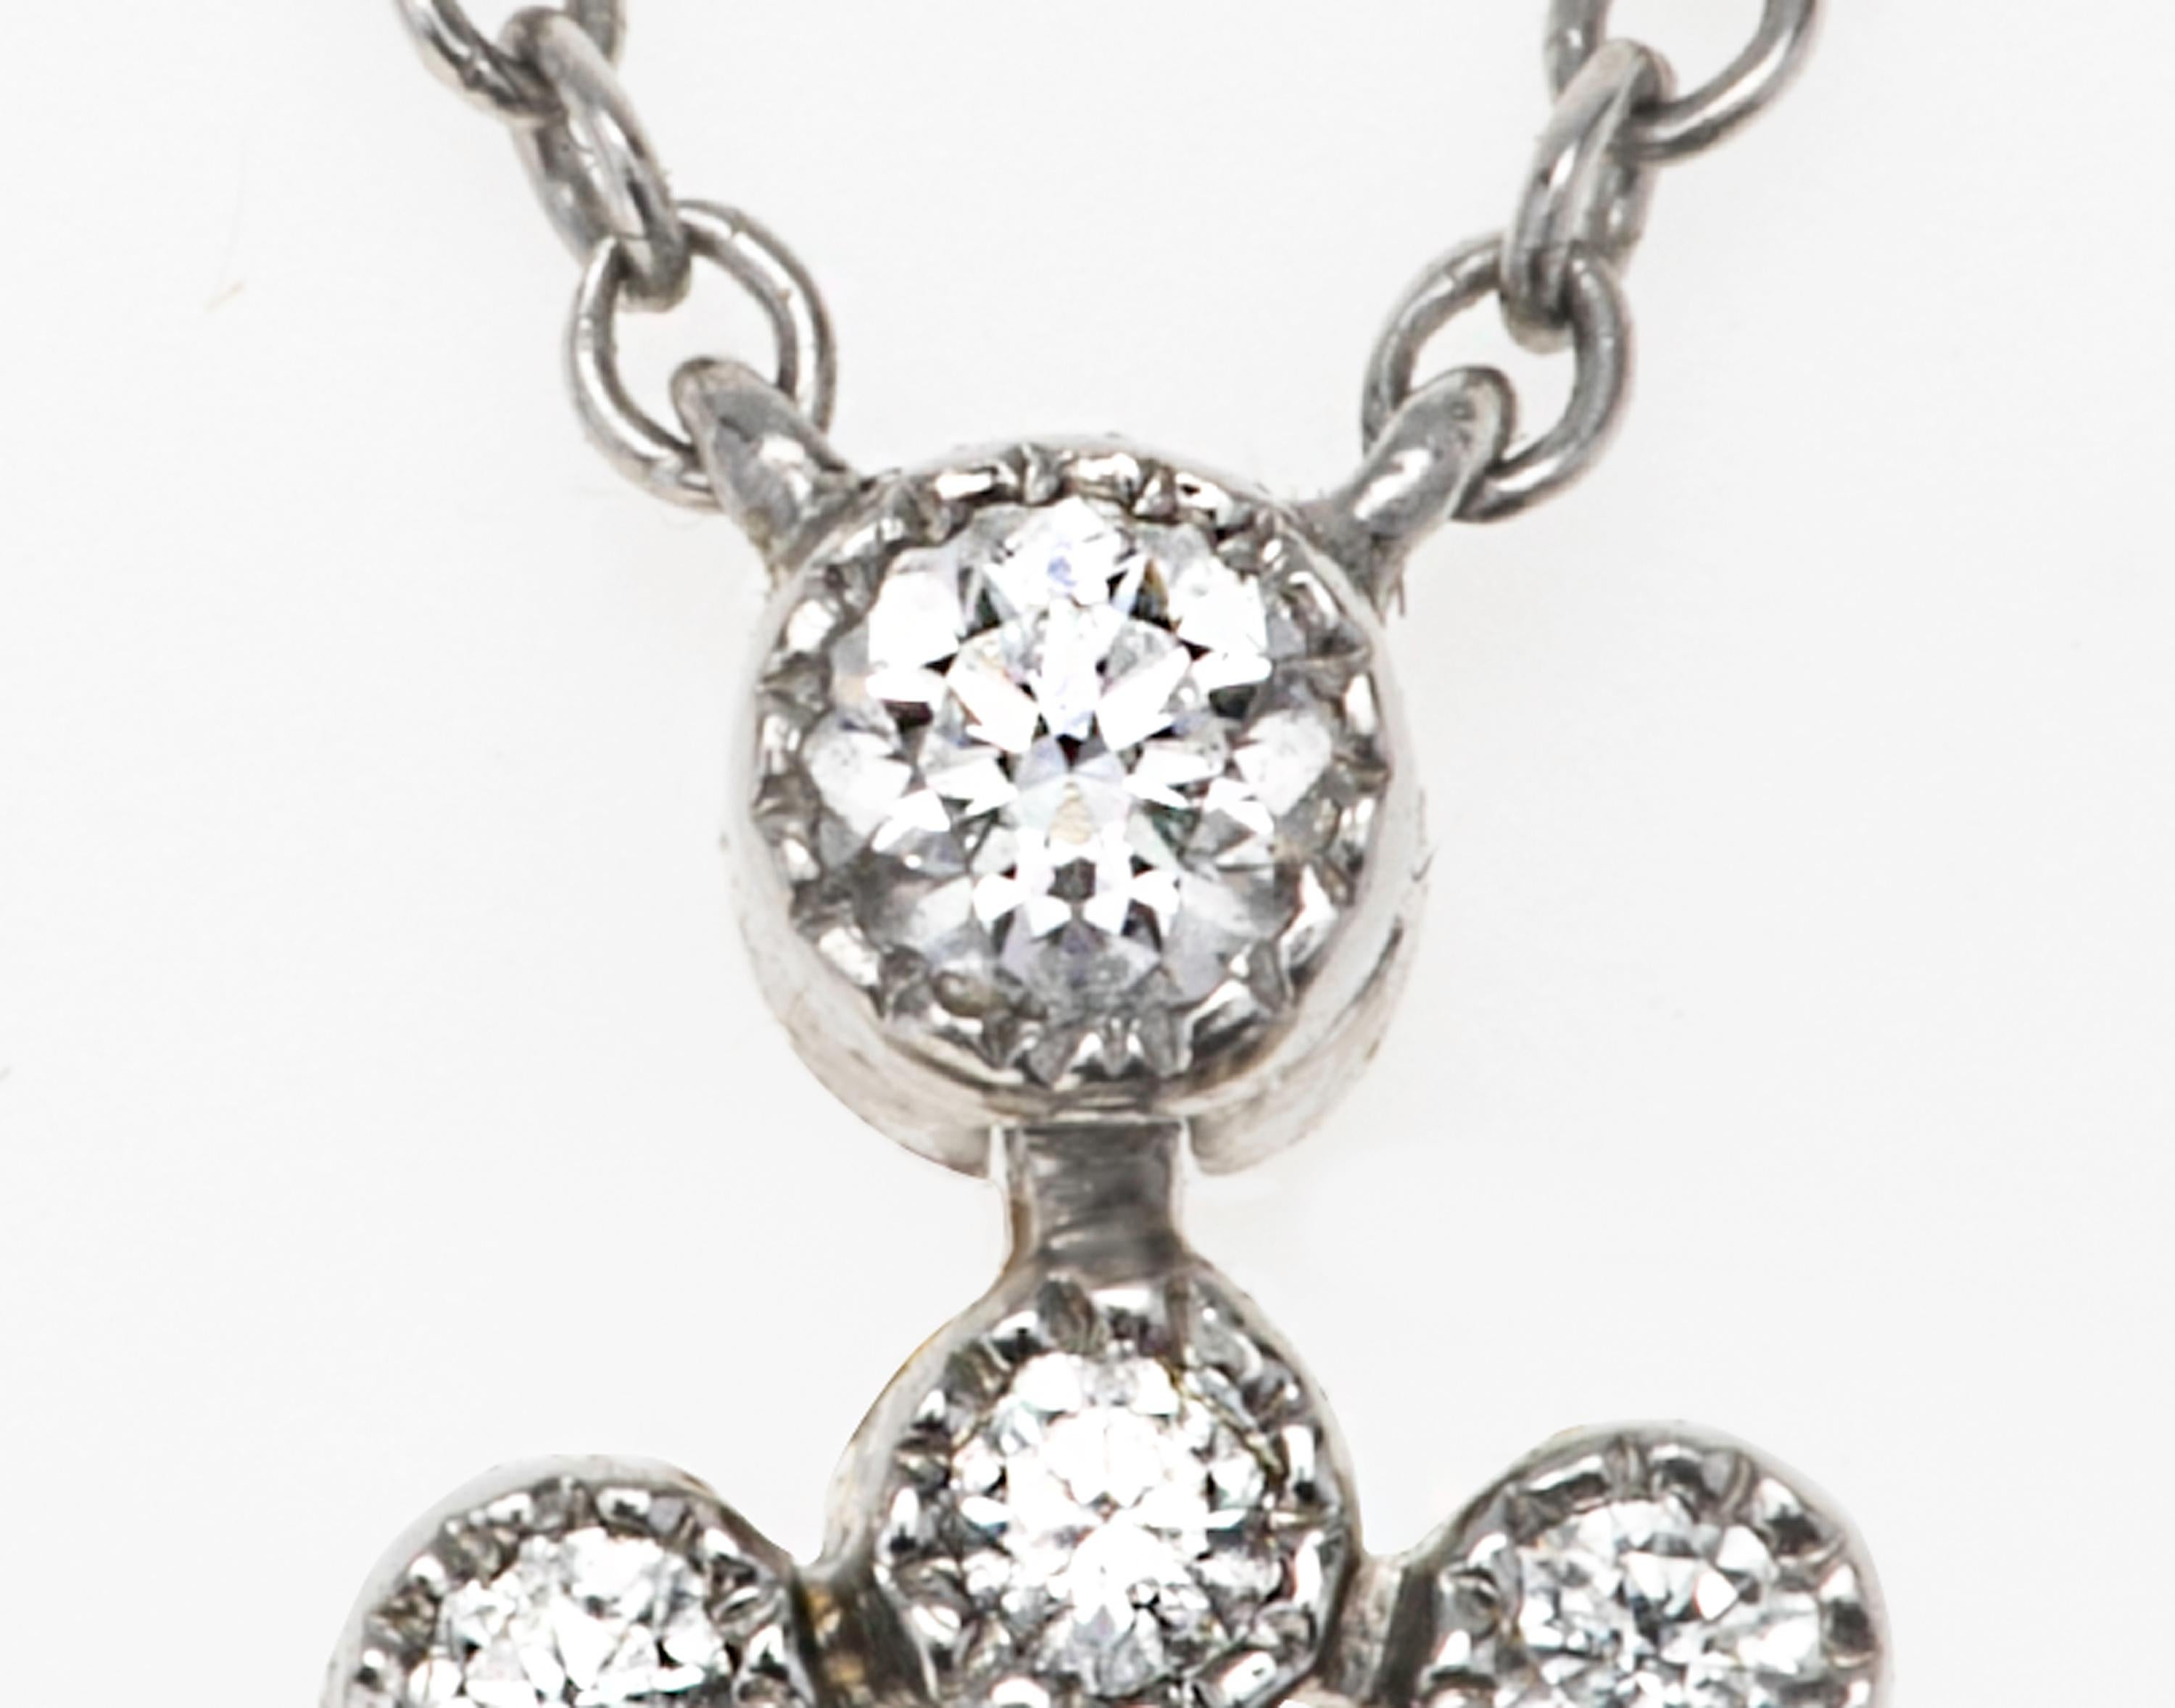 Tiffany & Co. Platinum Diamond Necklace In Excellent Condition For Sale In Summerland, CA